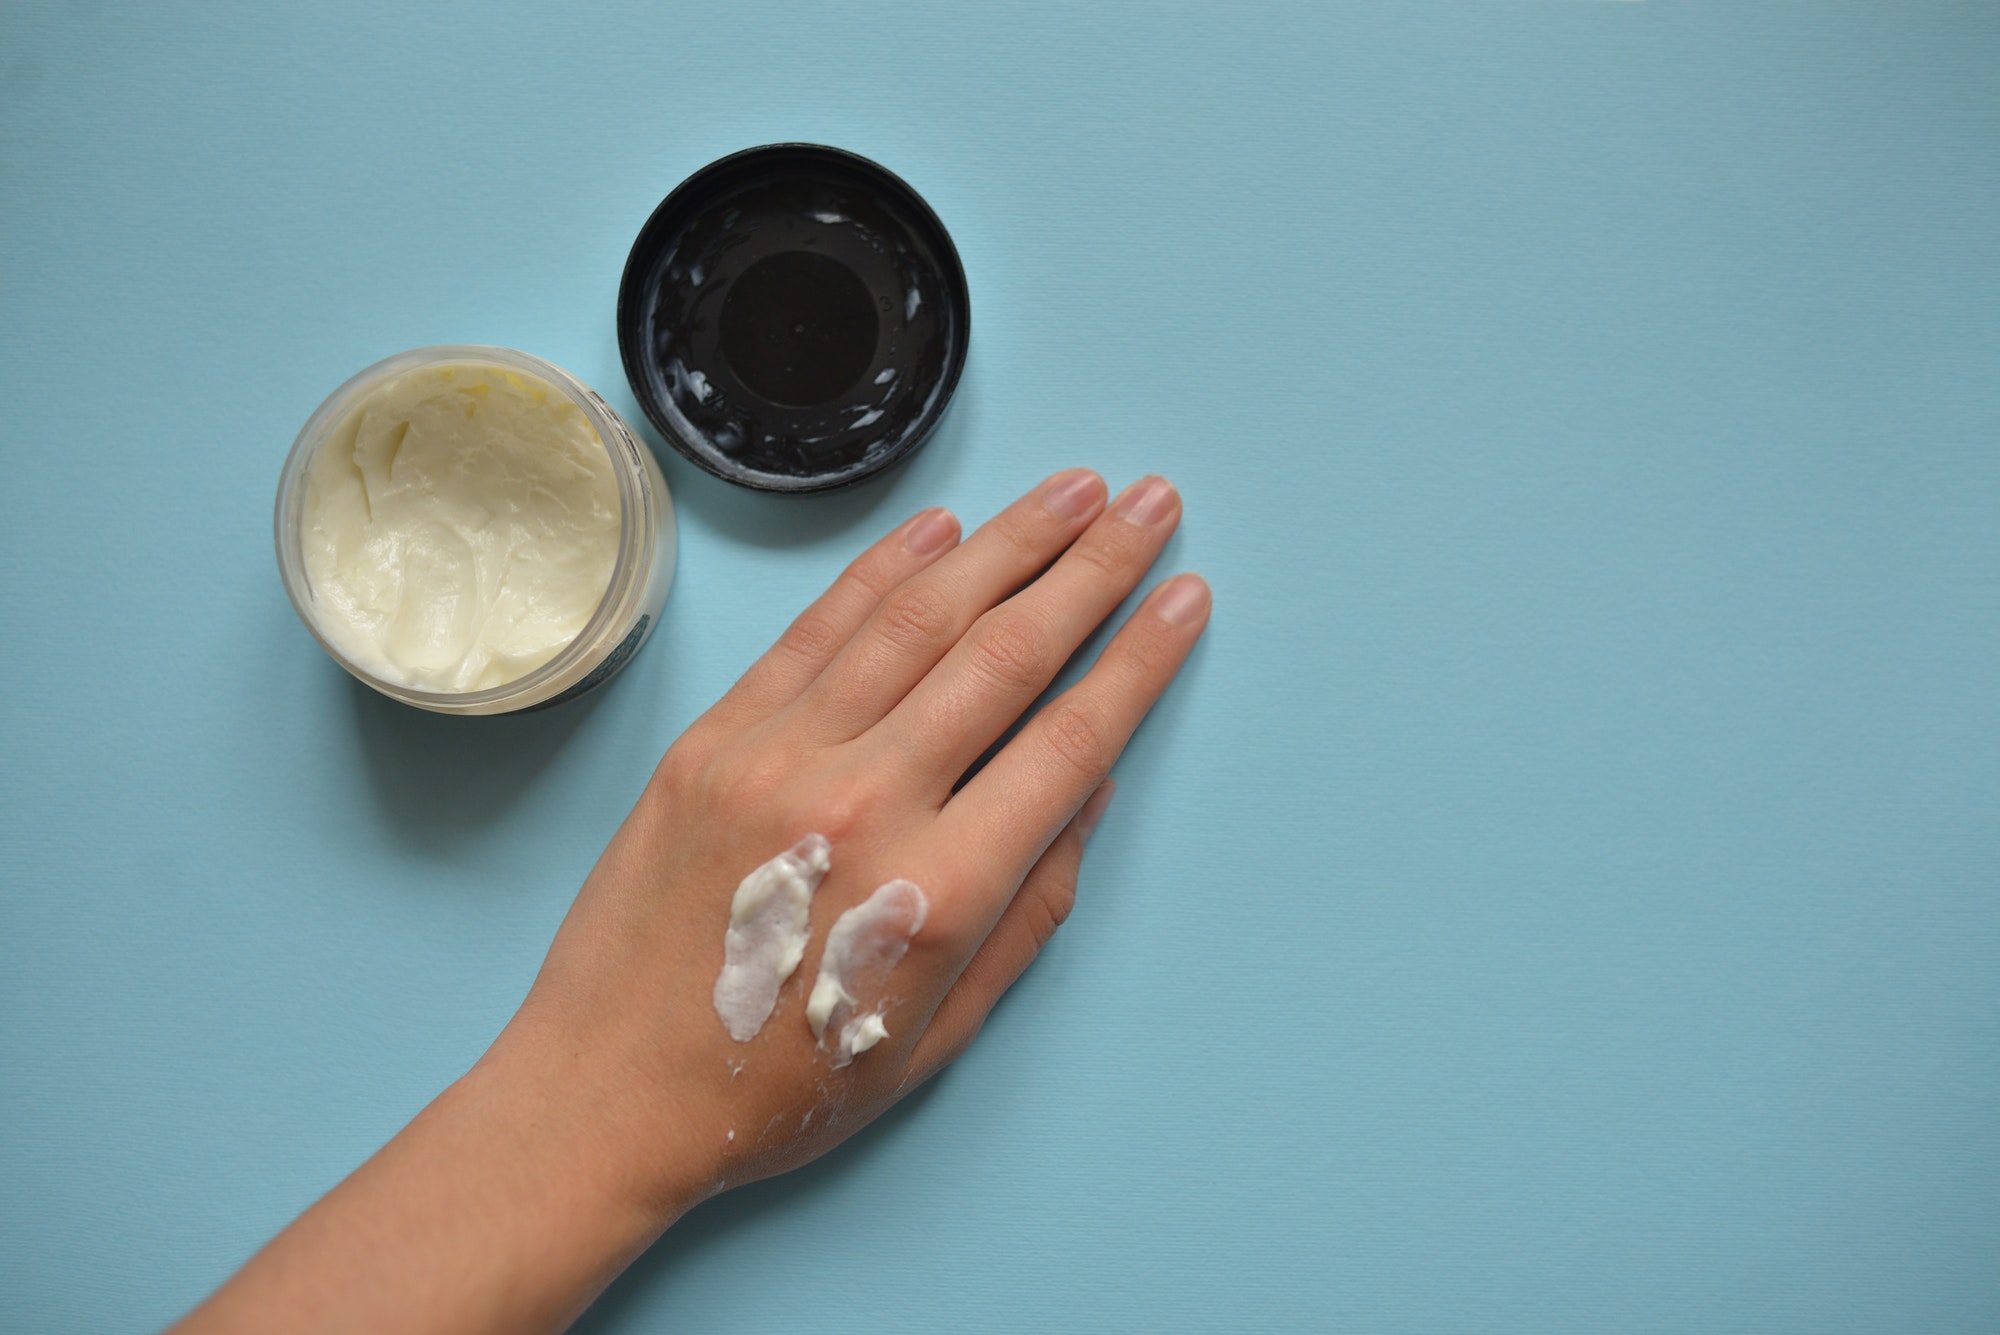 Hand with cream on it with blue background. Dry skin need care especially in winter.